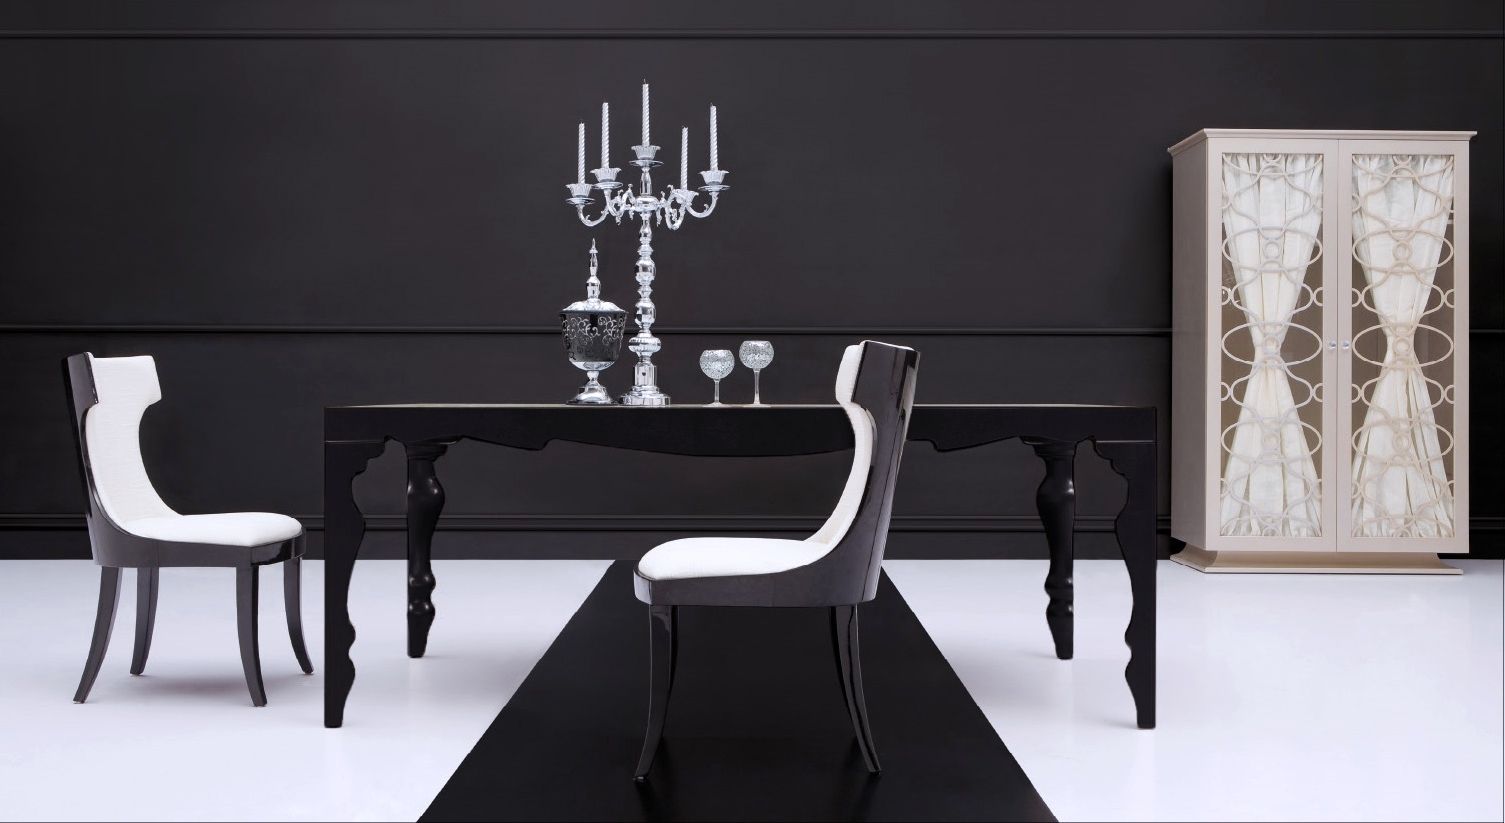 Roma Dining Tables With Regard To Newest Black Dining Table Contemporary Dining Table Roma (View 14 of 25)